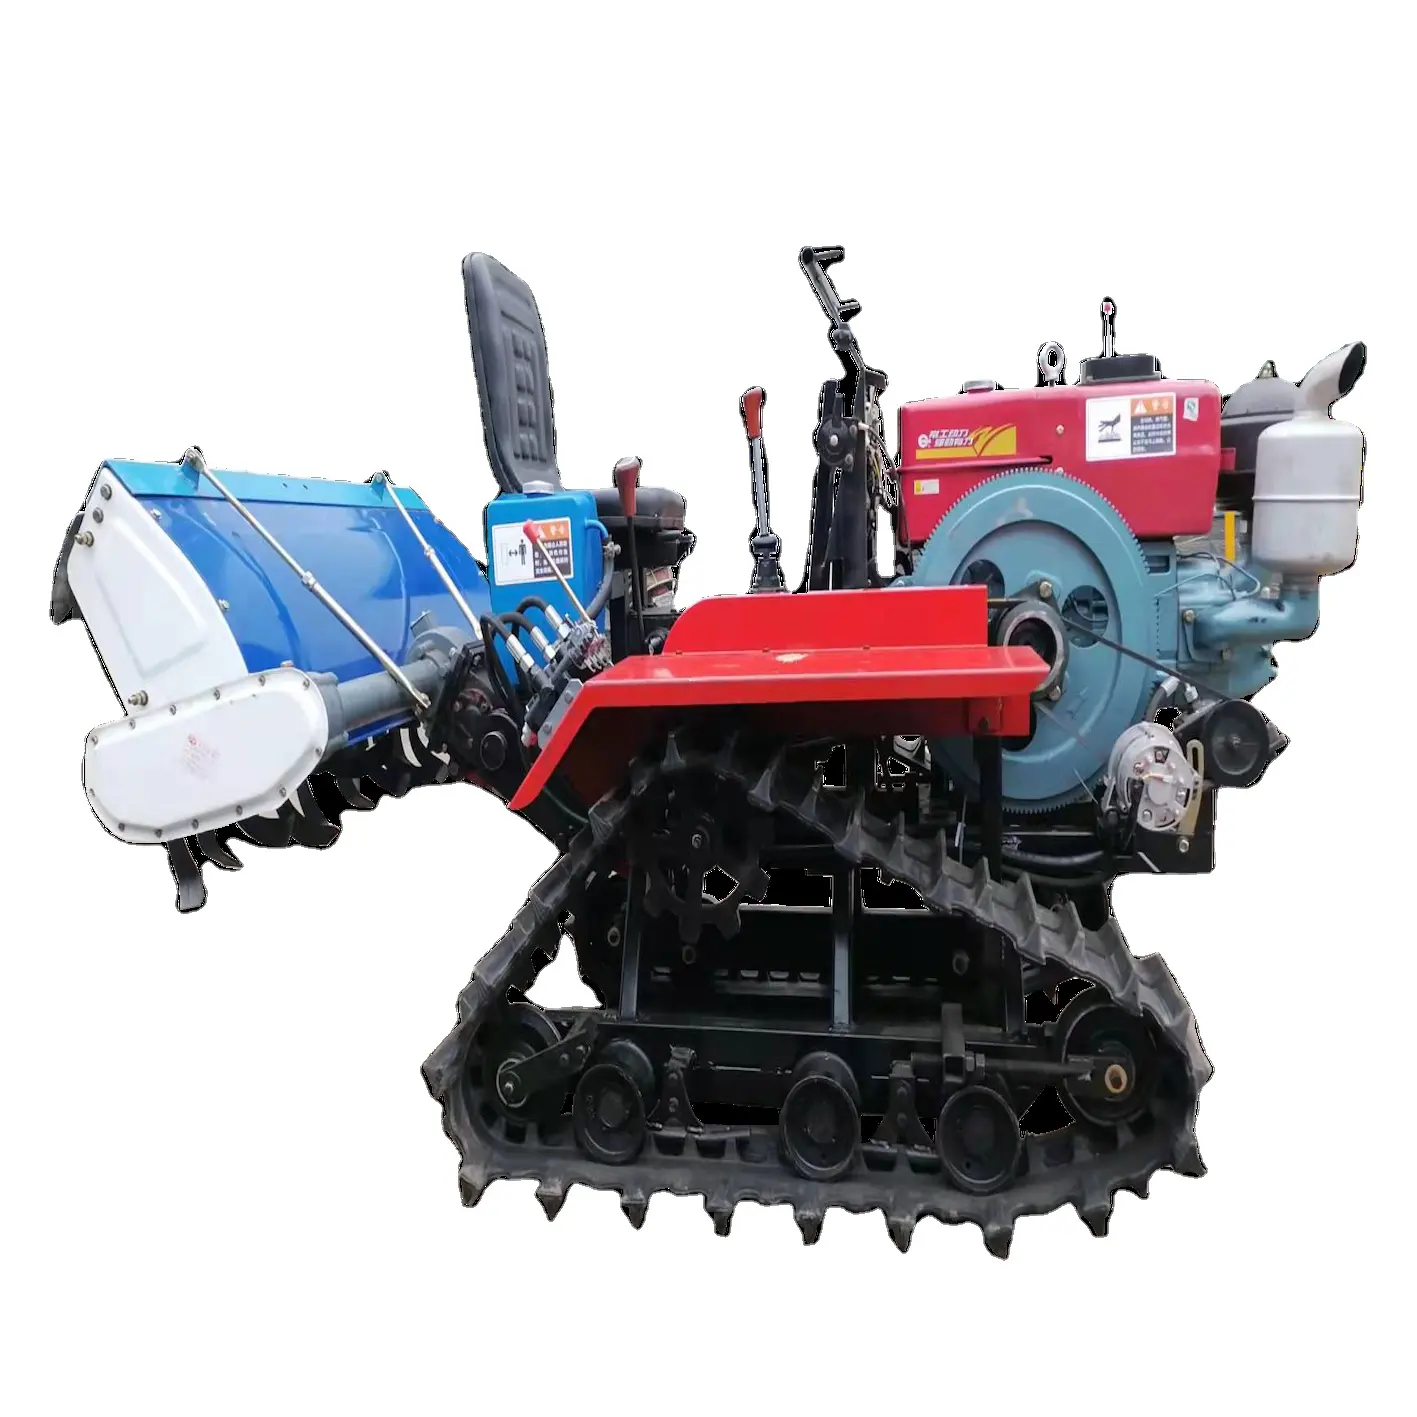 Chinese made tracked agricultural tractors and agricultural equipment